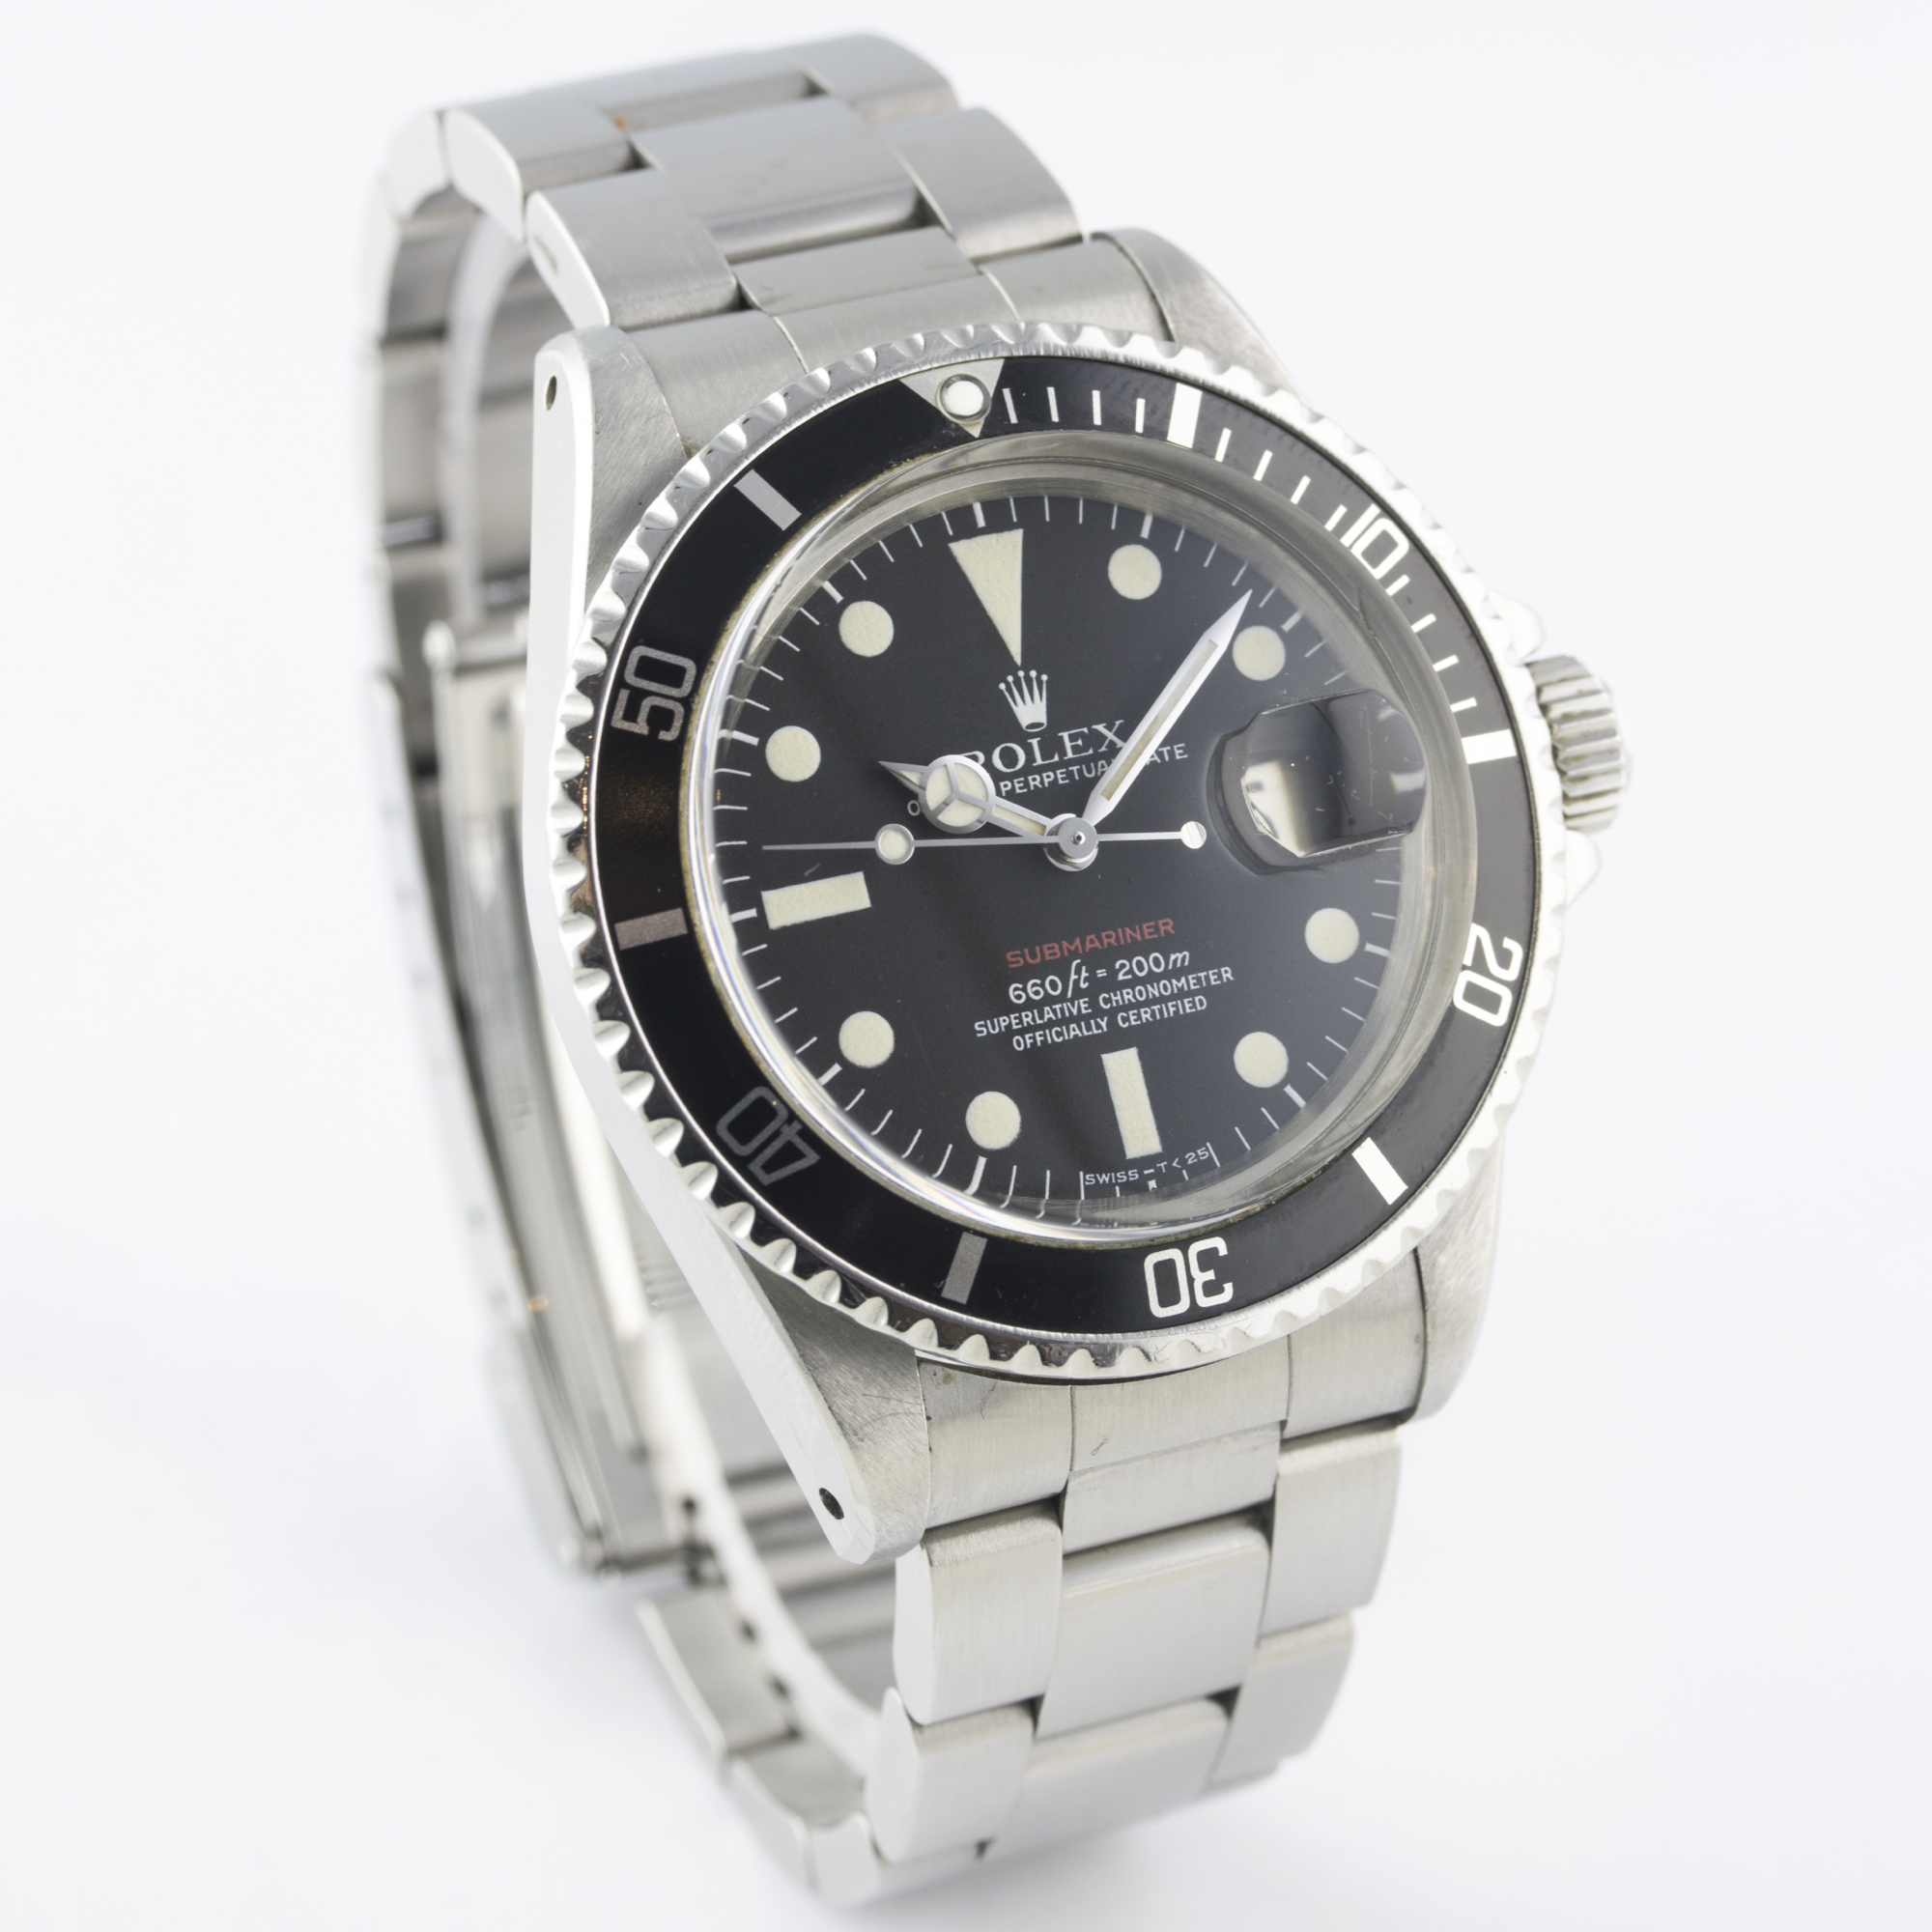 A RARE GENTLEMAN'S STAINLESS STEEL ROLEX OYSTER PERPETUAL DATE "RED WRITING" SUBMARINER BRACELET - Image 6 of 11